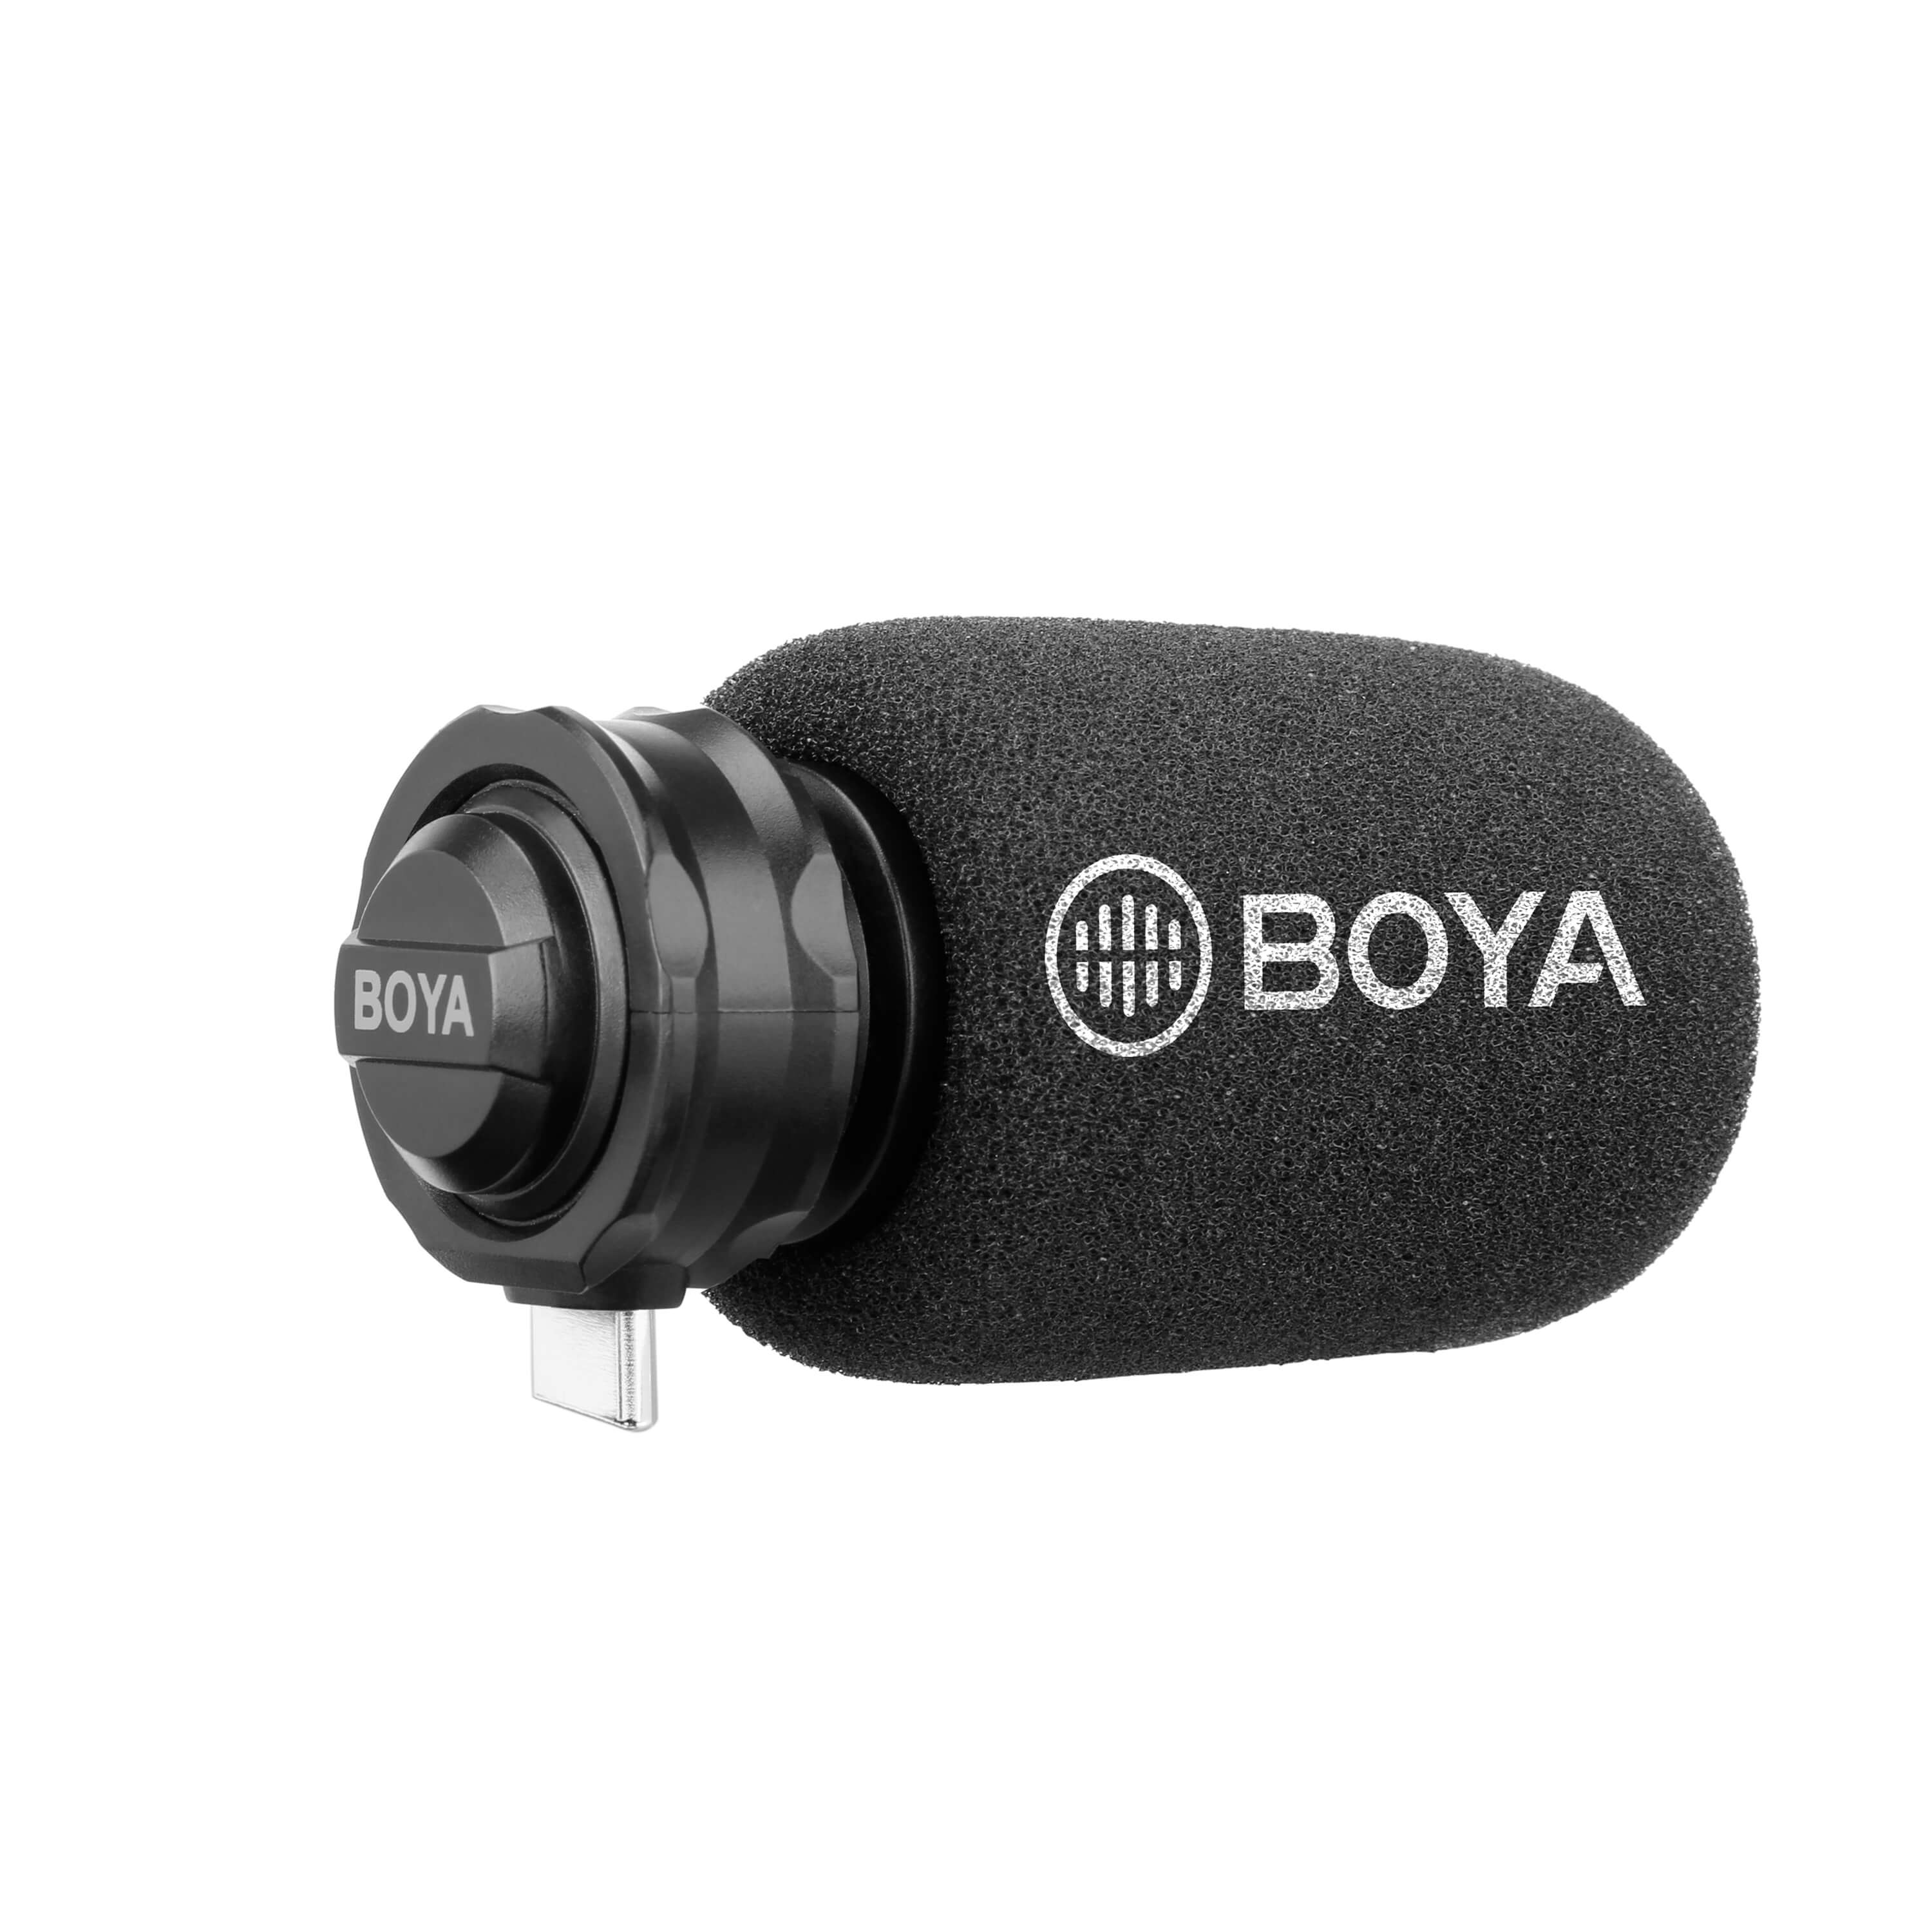 BOYA Microphone BY-DM100 Condensator USB-C Android